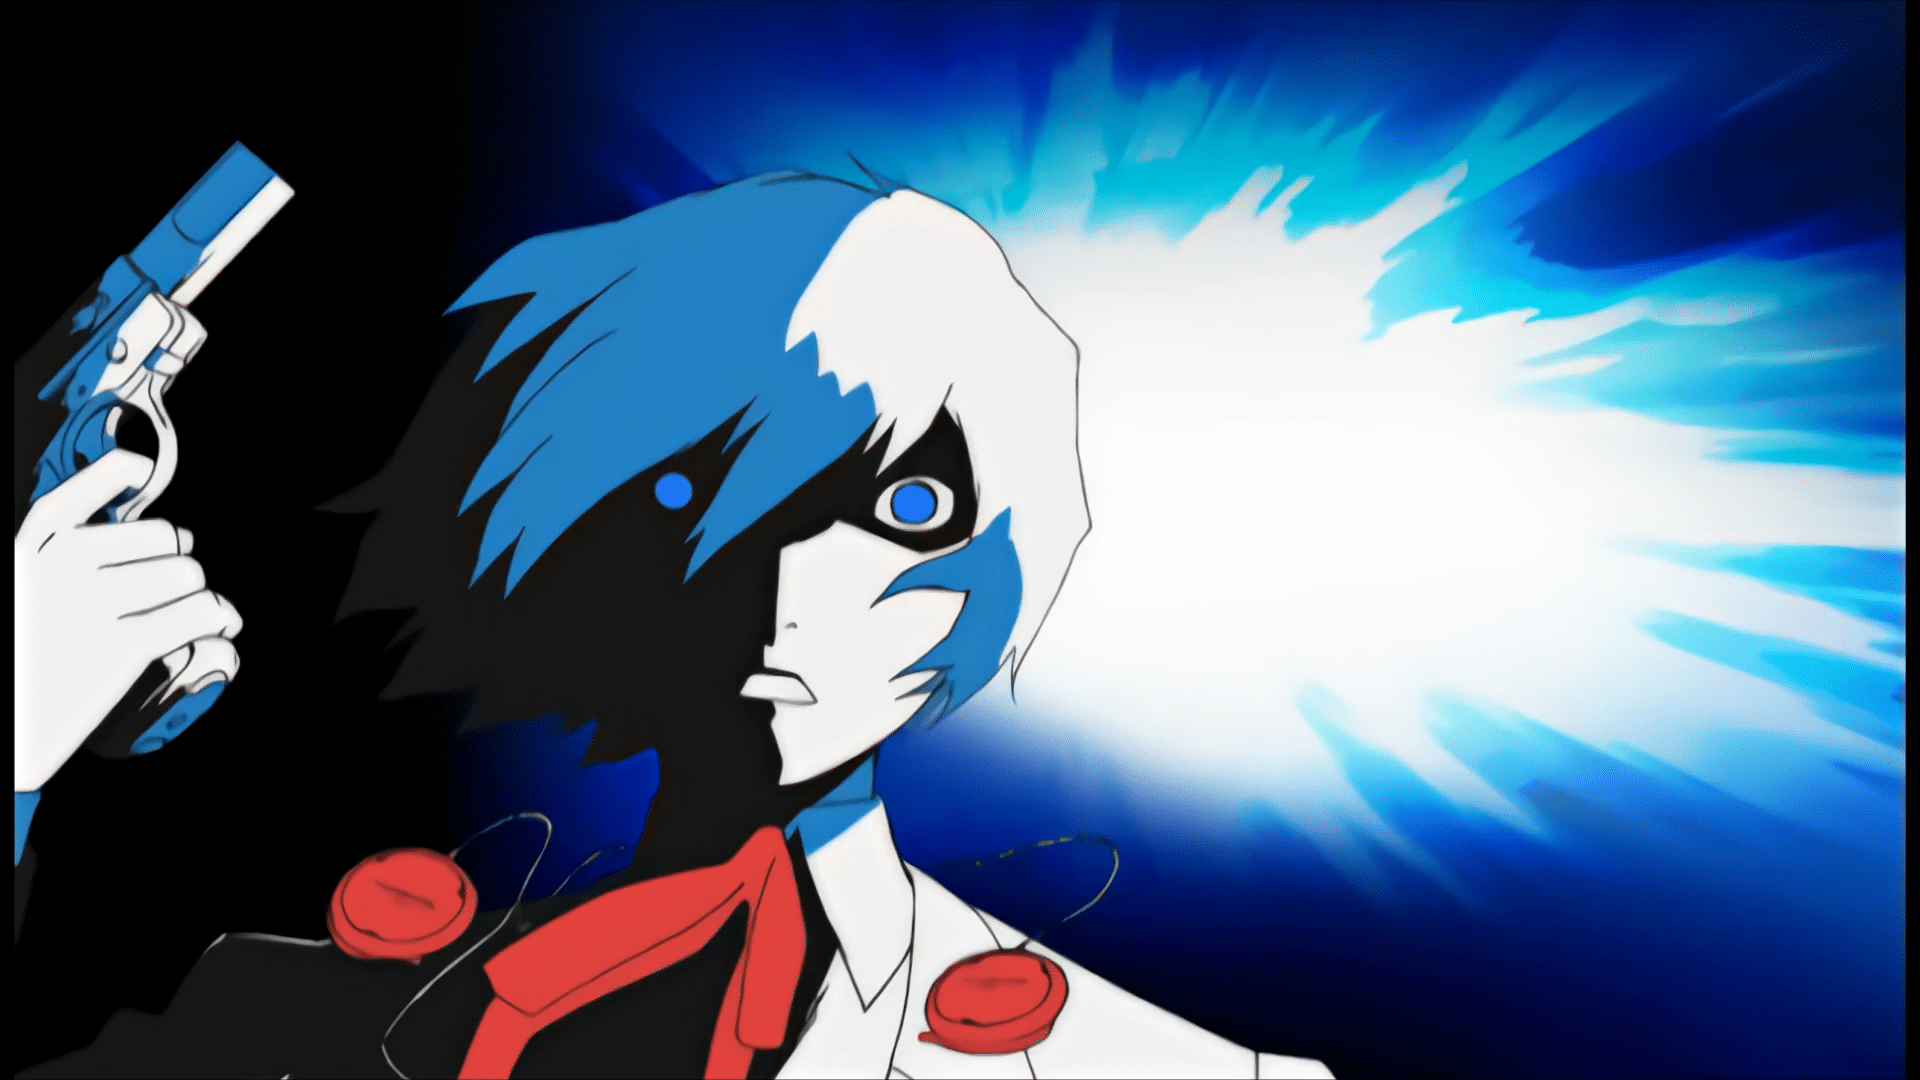 Persona 3 Portable & Persona 4 Golden Modern Platform Ports Reveal New Features